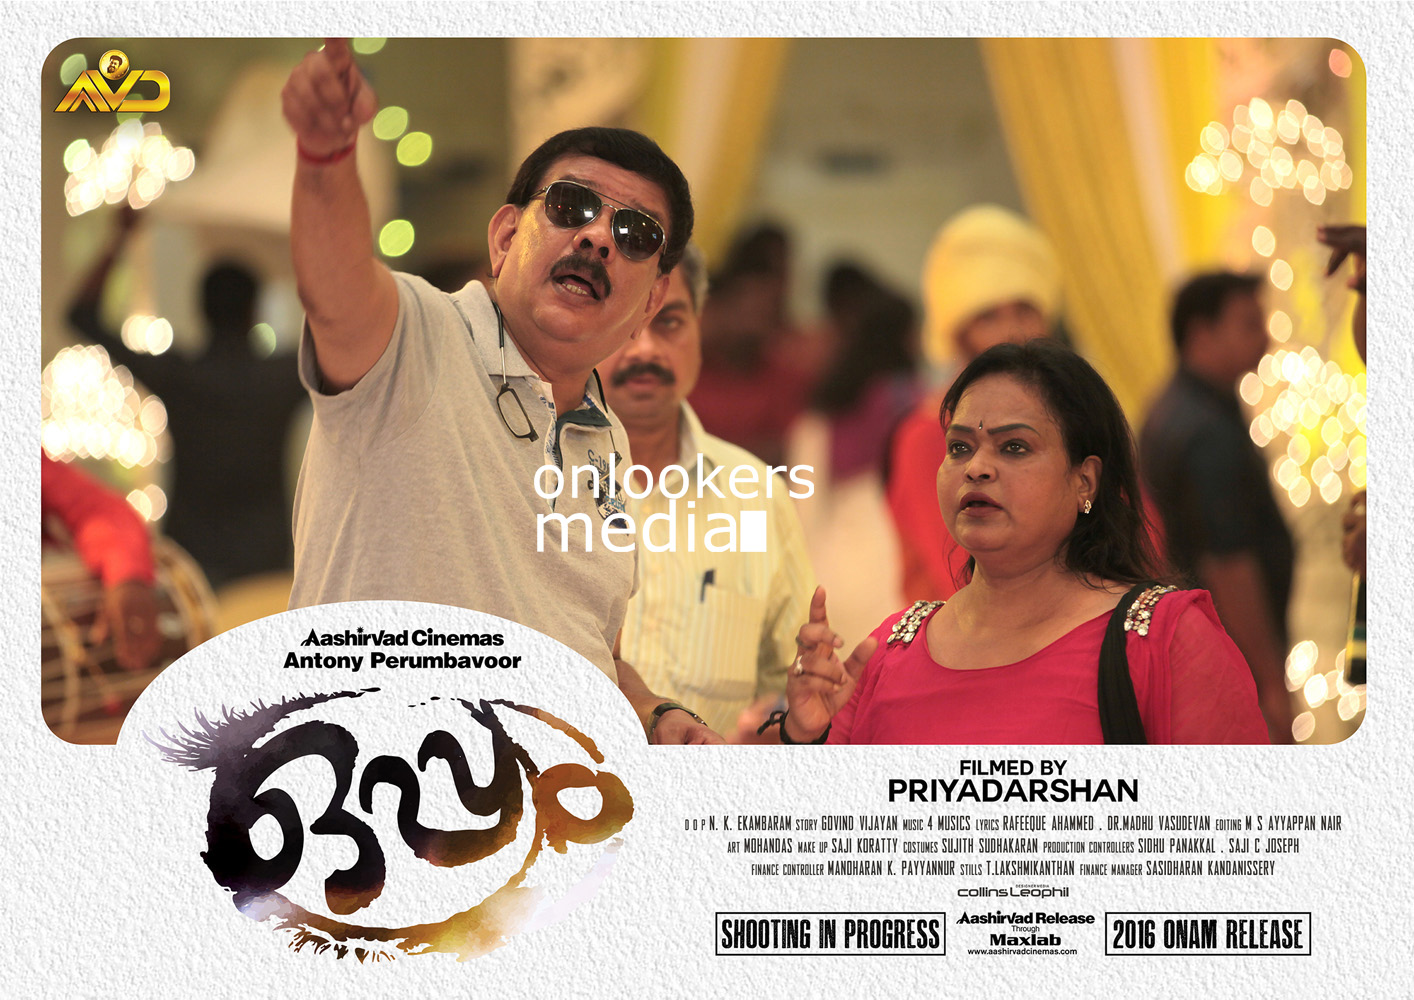 Tollywood production house clinches remaking rights of Mohanlal-starrer  Oppam